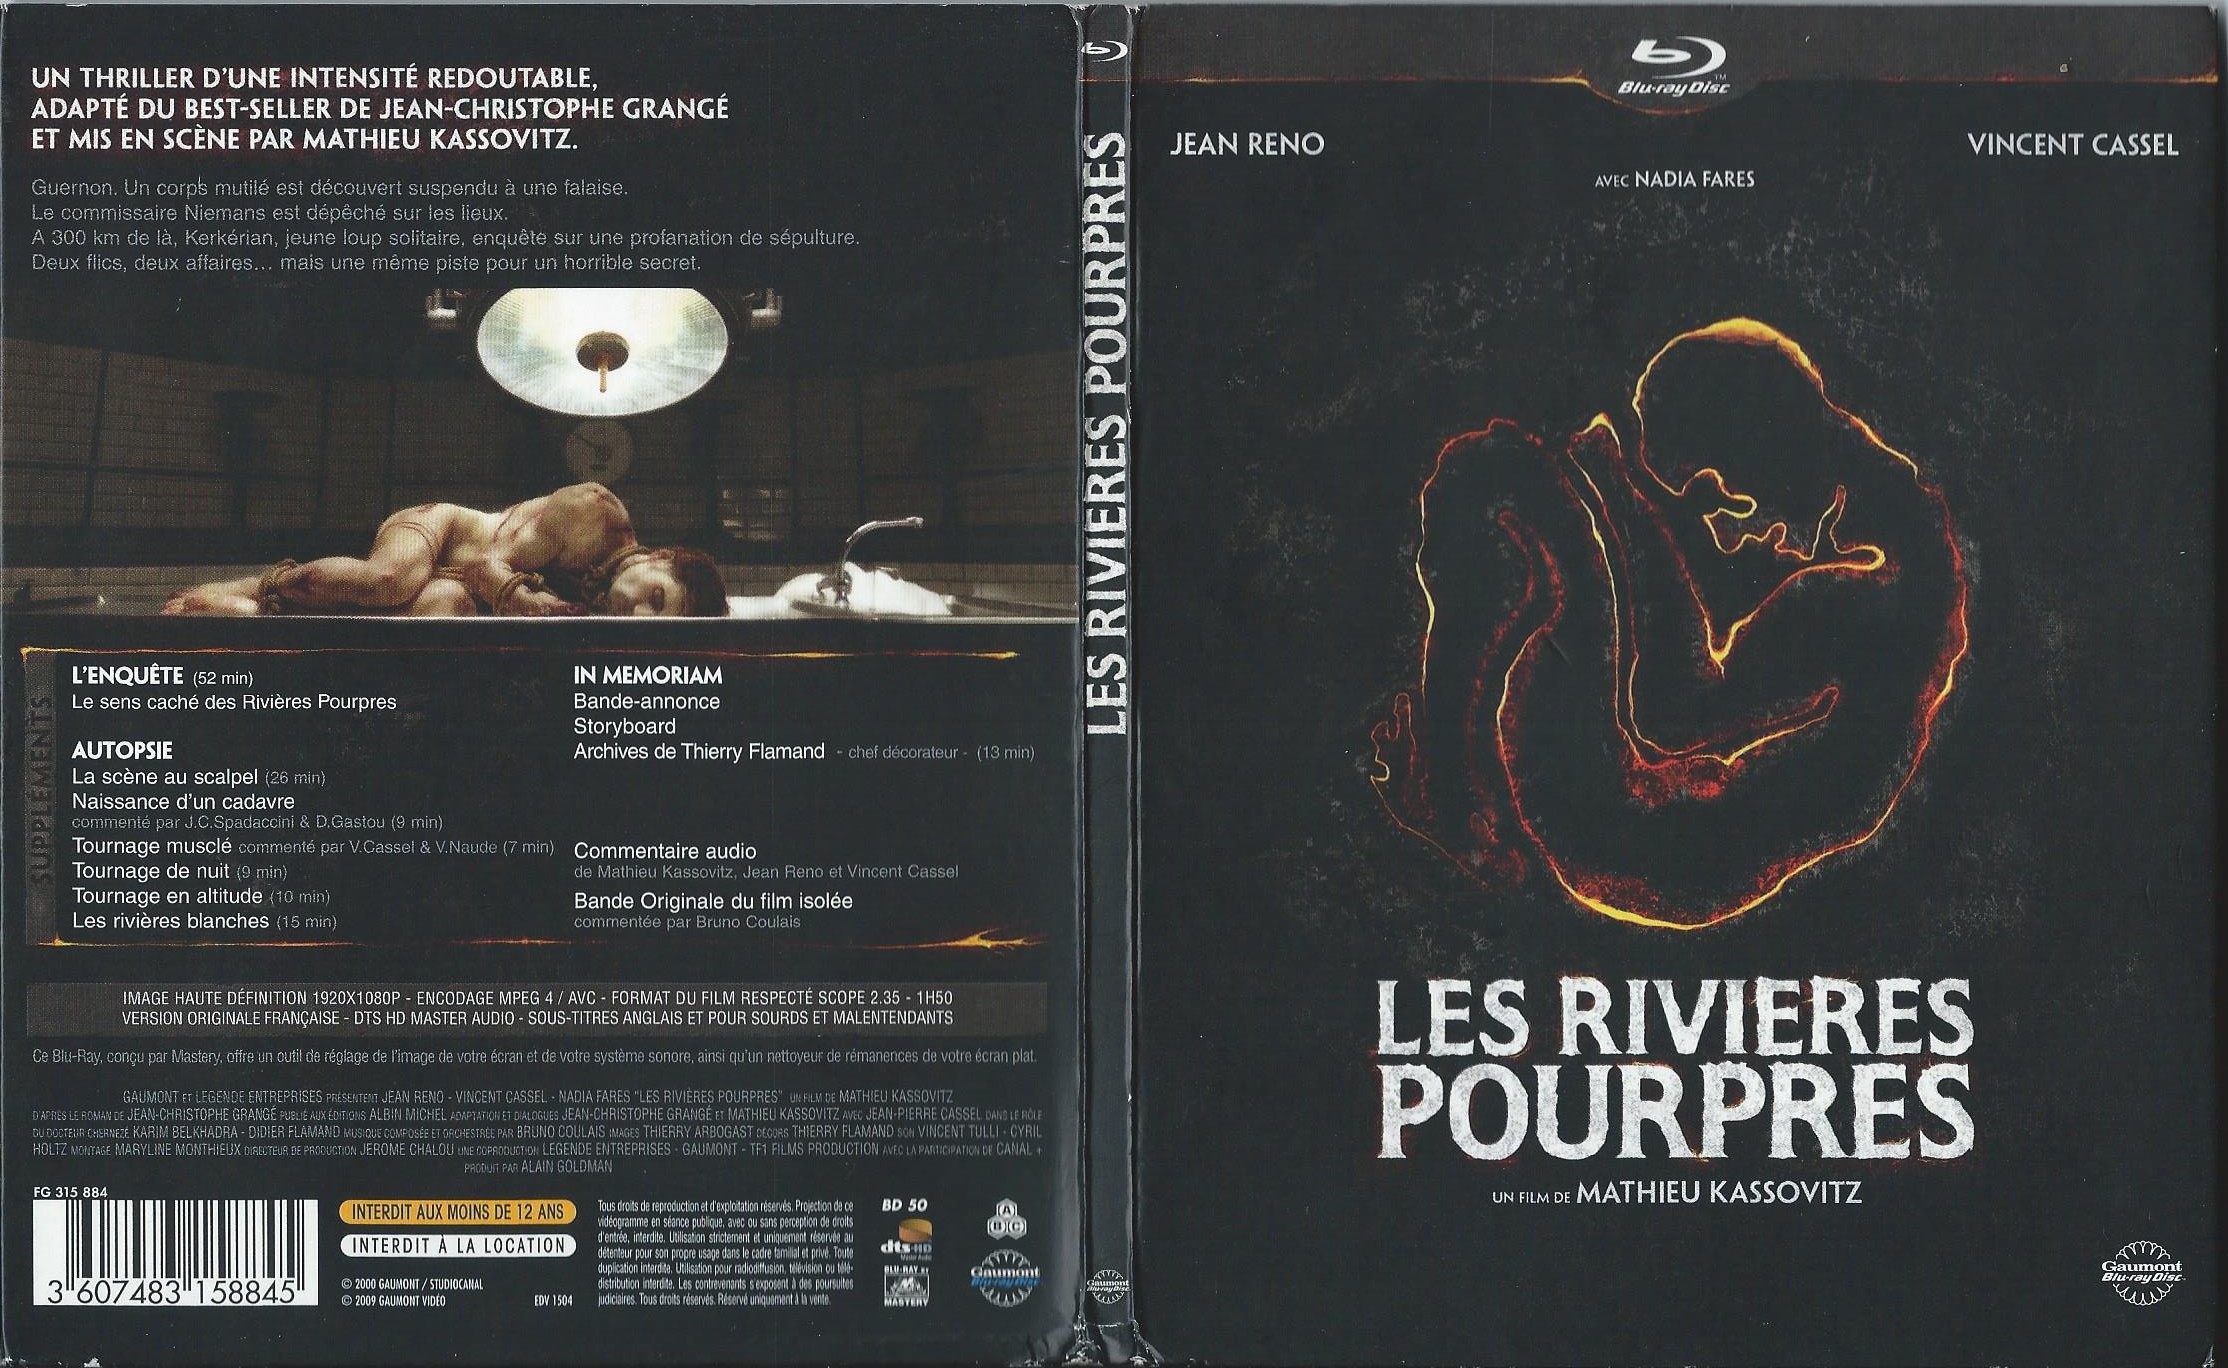 Jaquette DVD Les rivires pourpres (BLU-RAY)